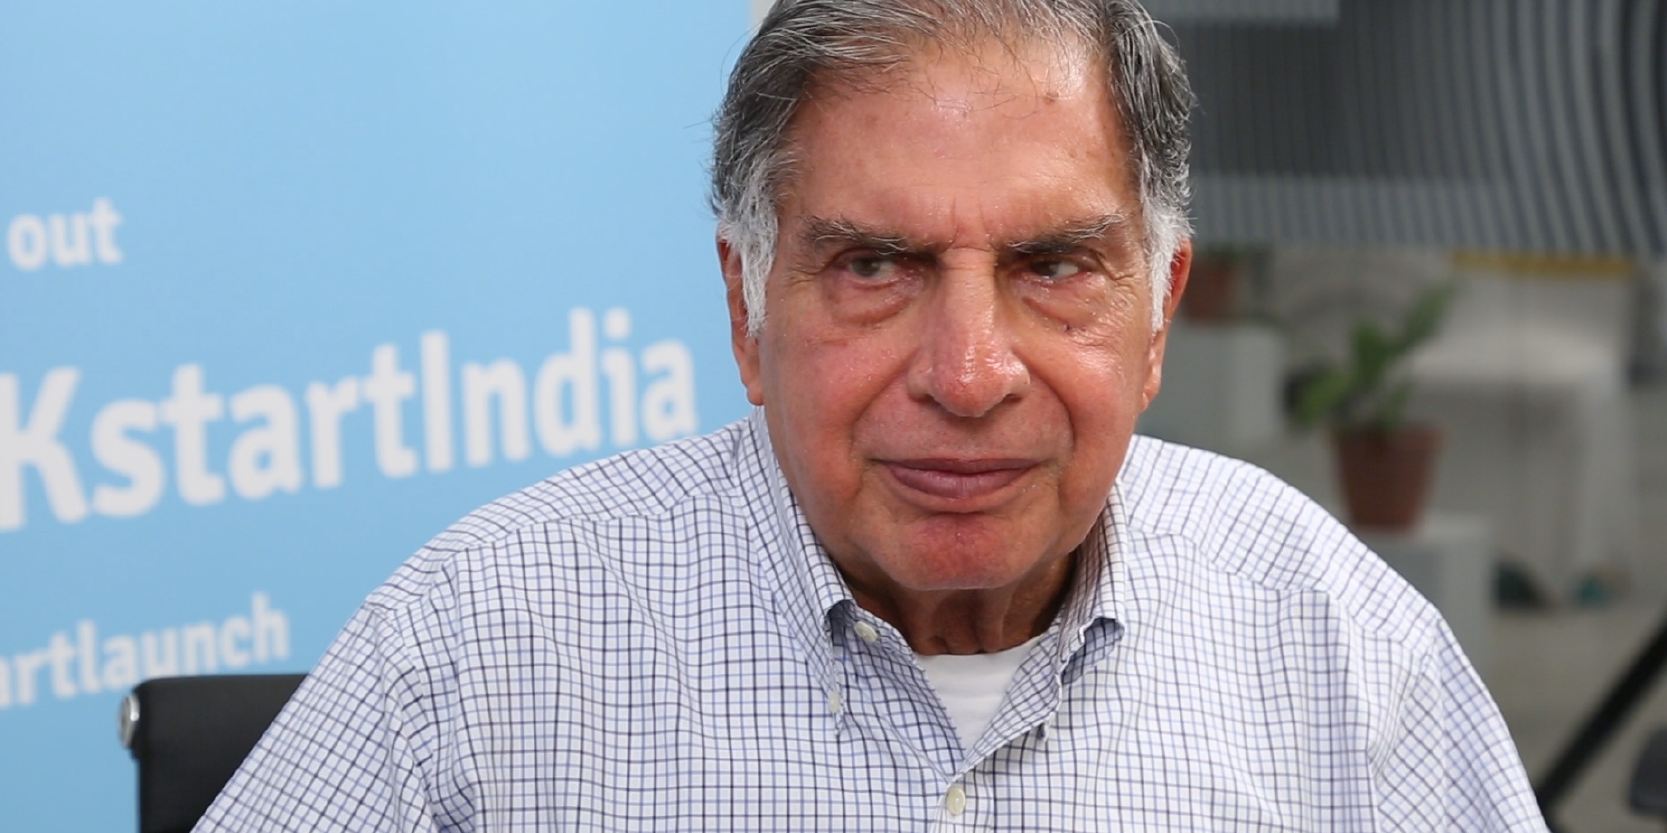 There’s no shortcut to building trust: Ratan Tata in a Q&A at Kstart launch